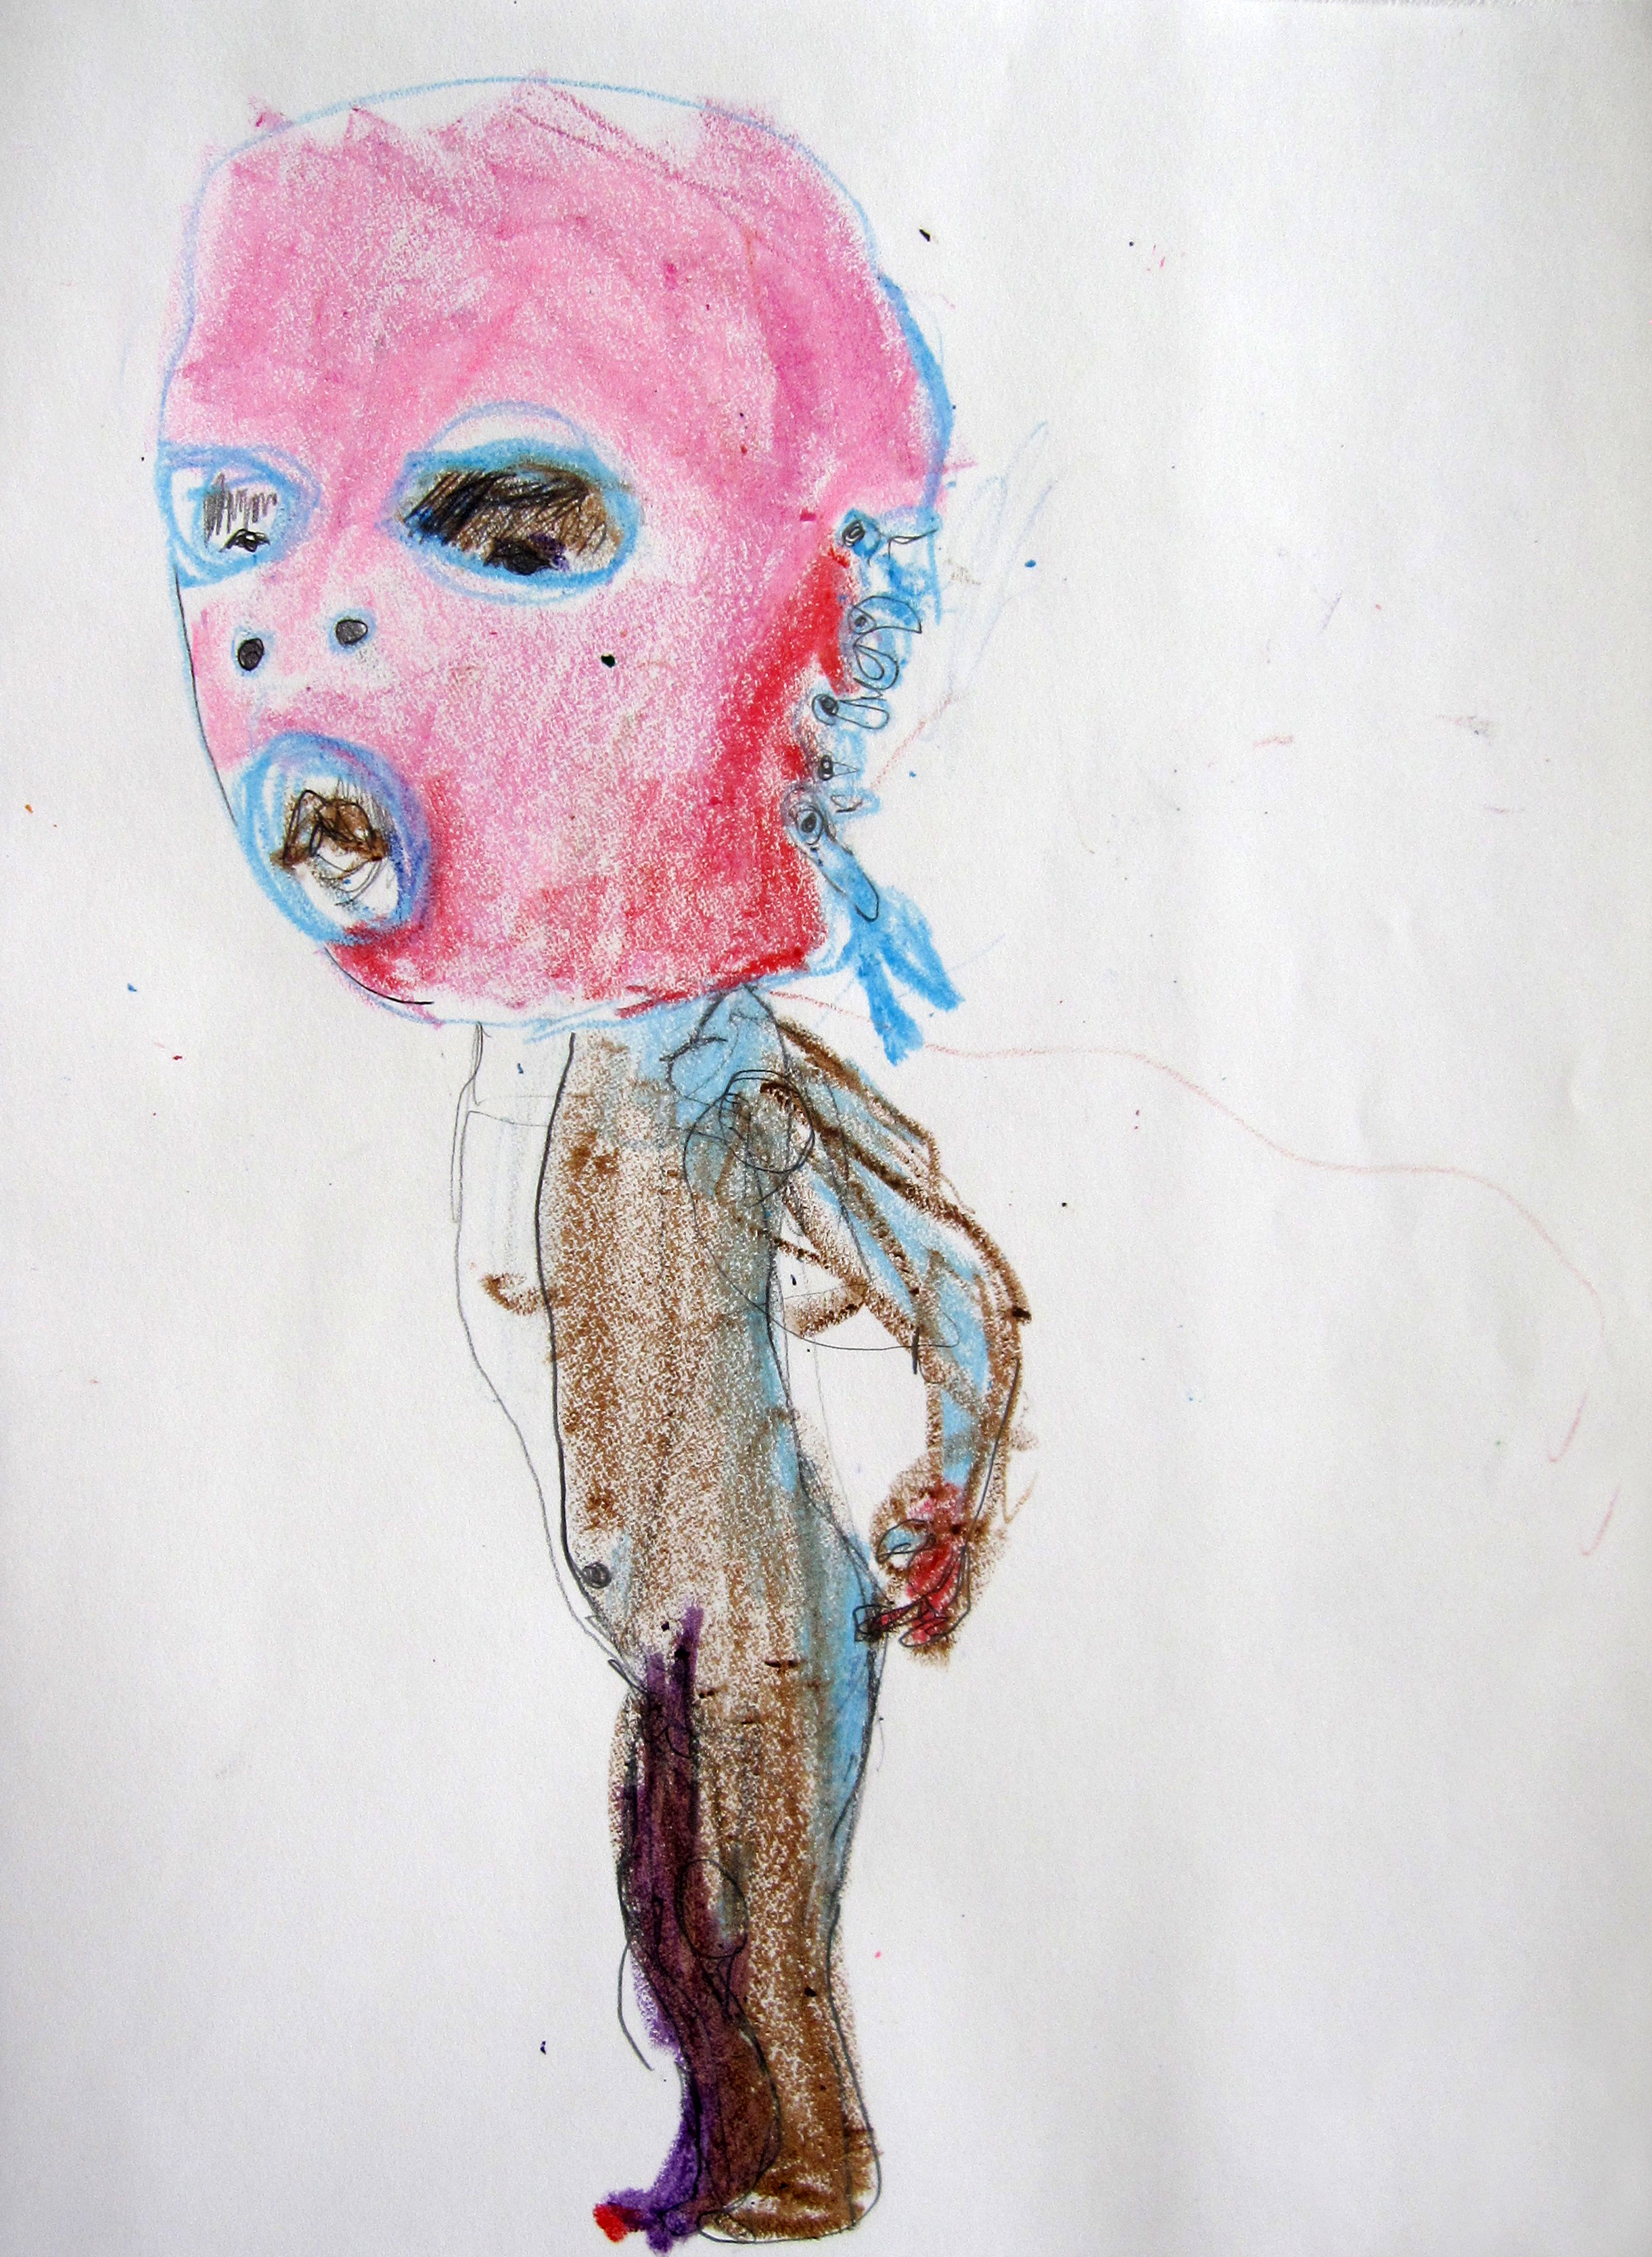 Lucha 1, 2008, Crayon on paper, 14 X11 in.